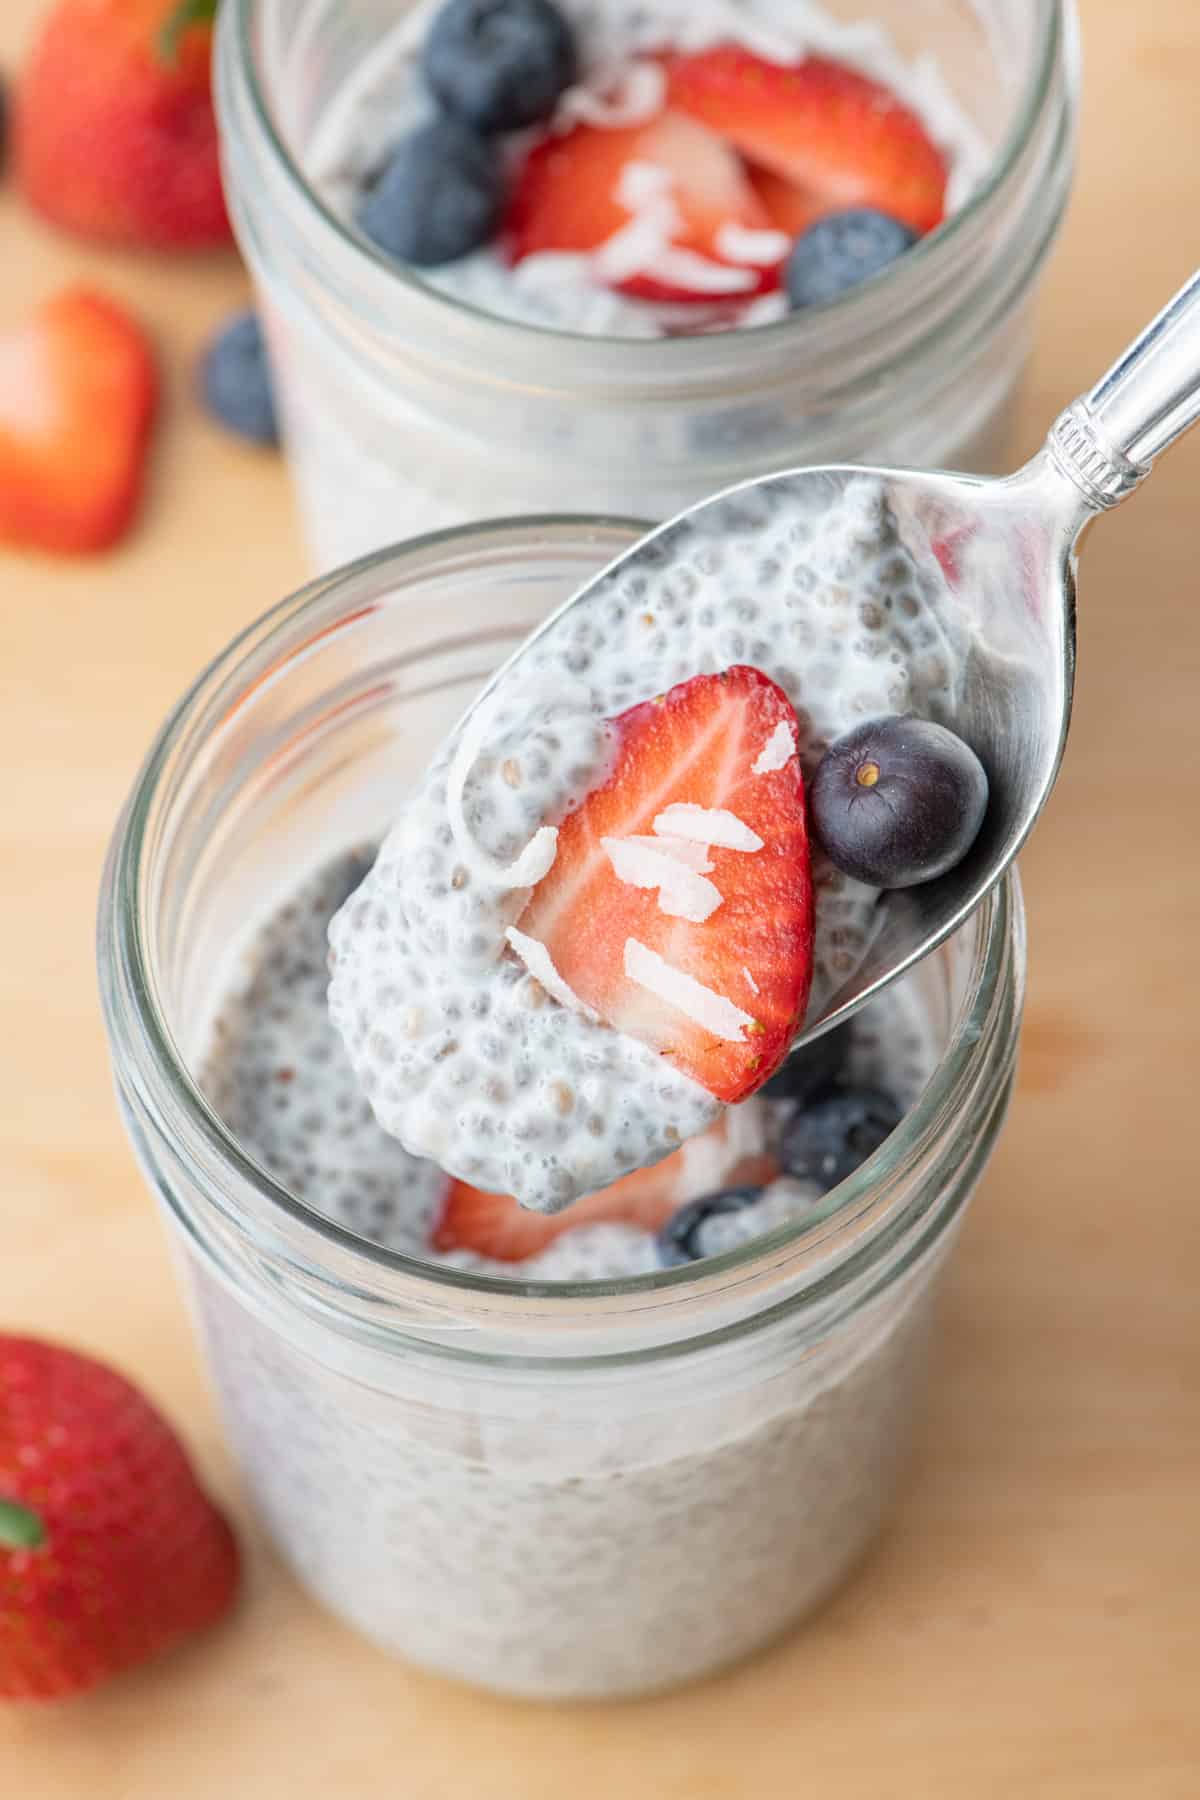 3 ingredient chia seed pudding with berries on top and a spoon scooping some up to show pudding like consistency.